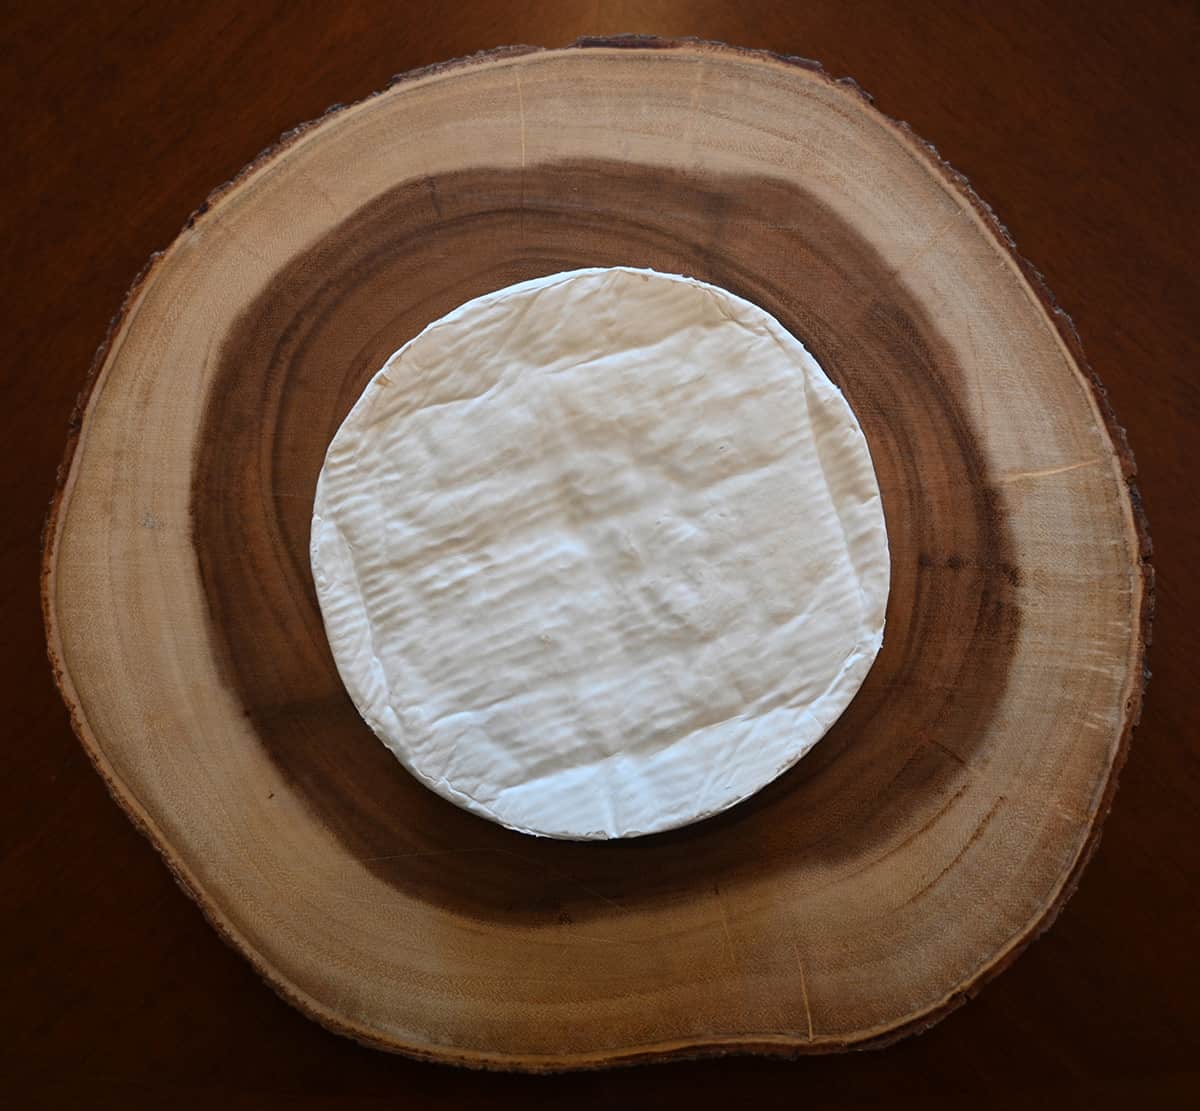 Top down image of the Brie unwrapped from the packaging and with the rind on, served on a wood charcuterie board.